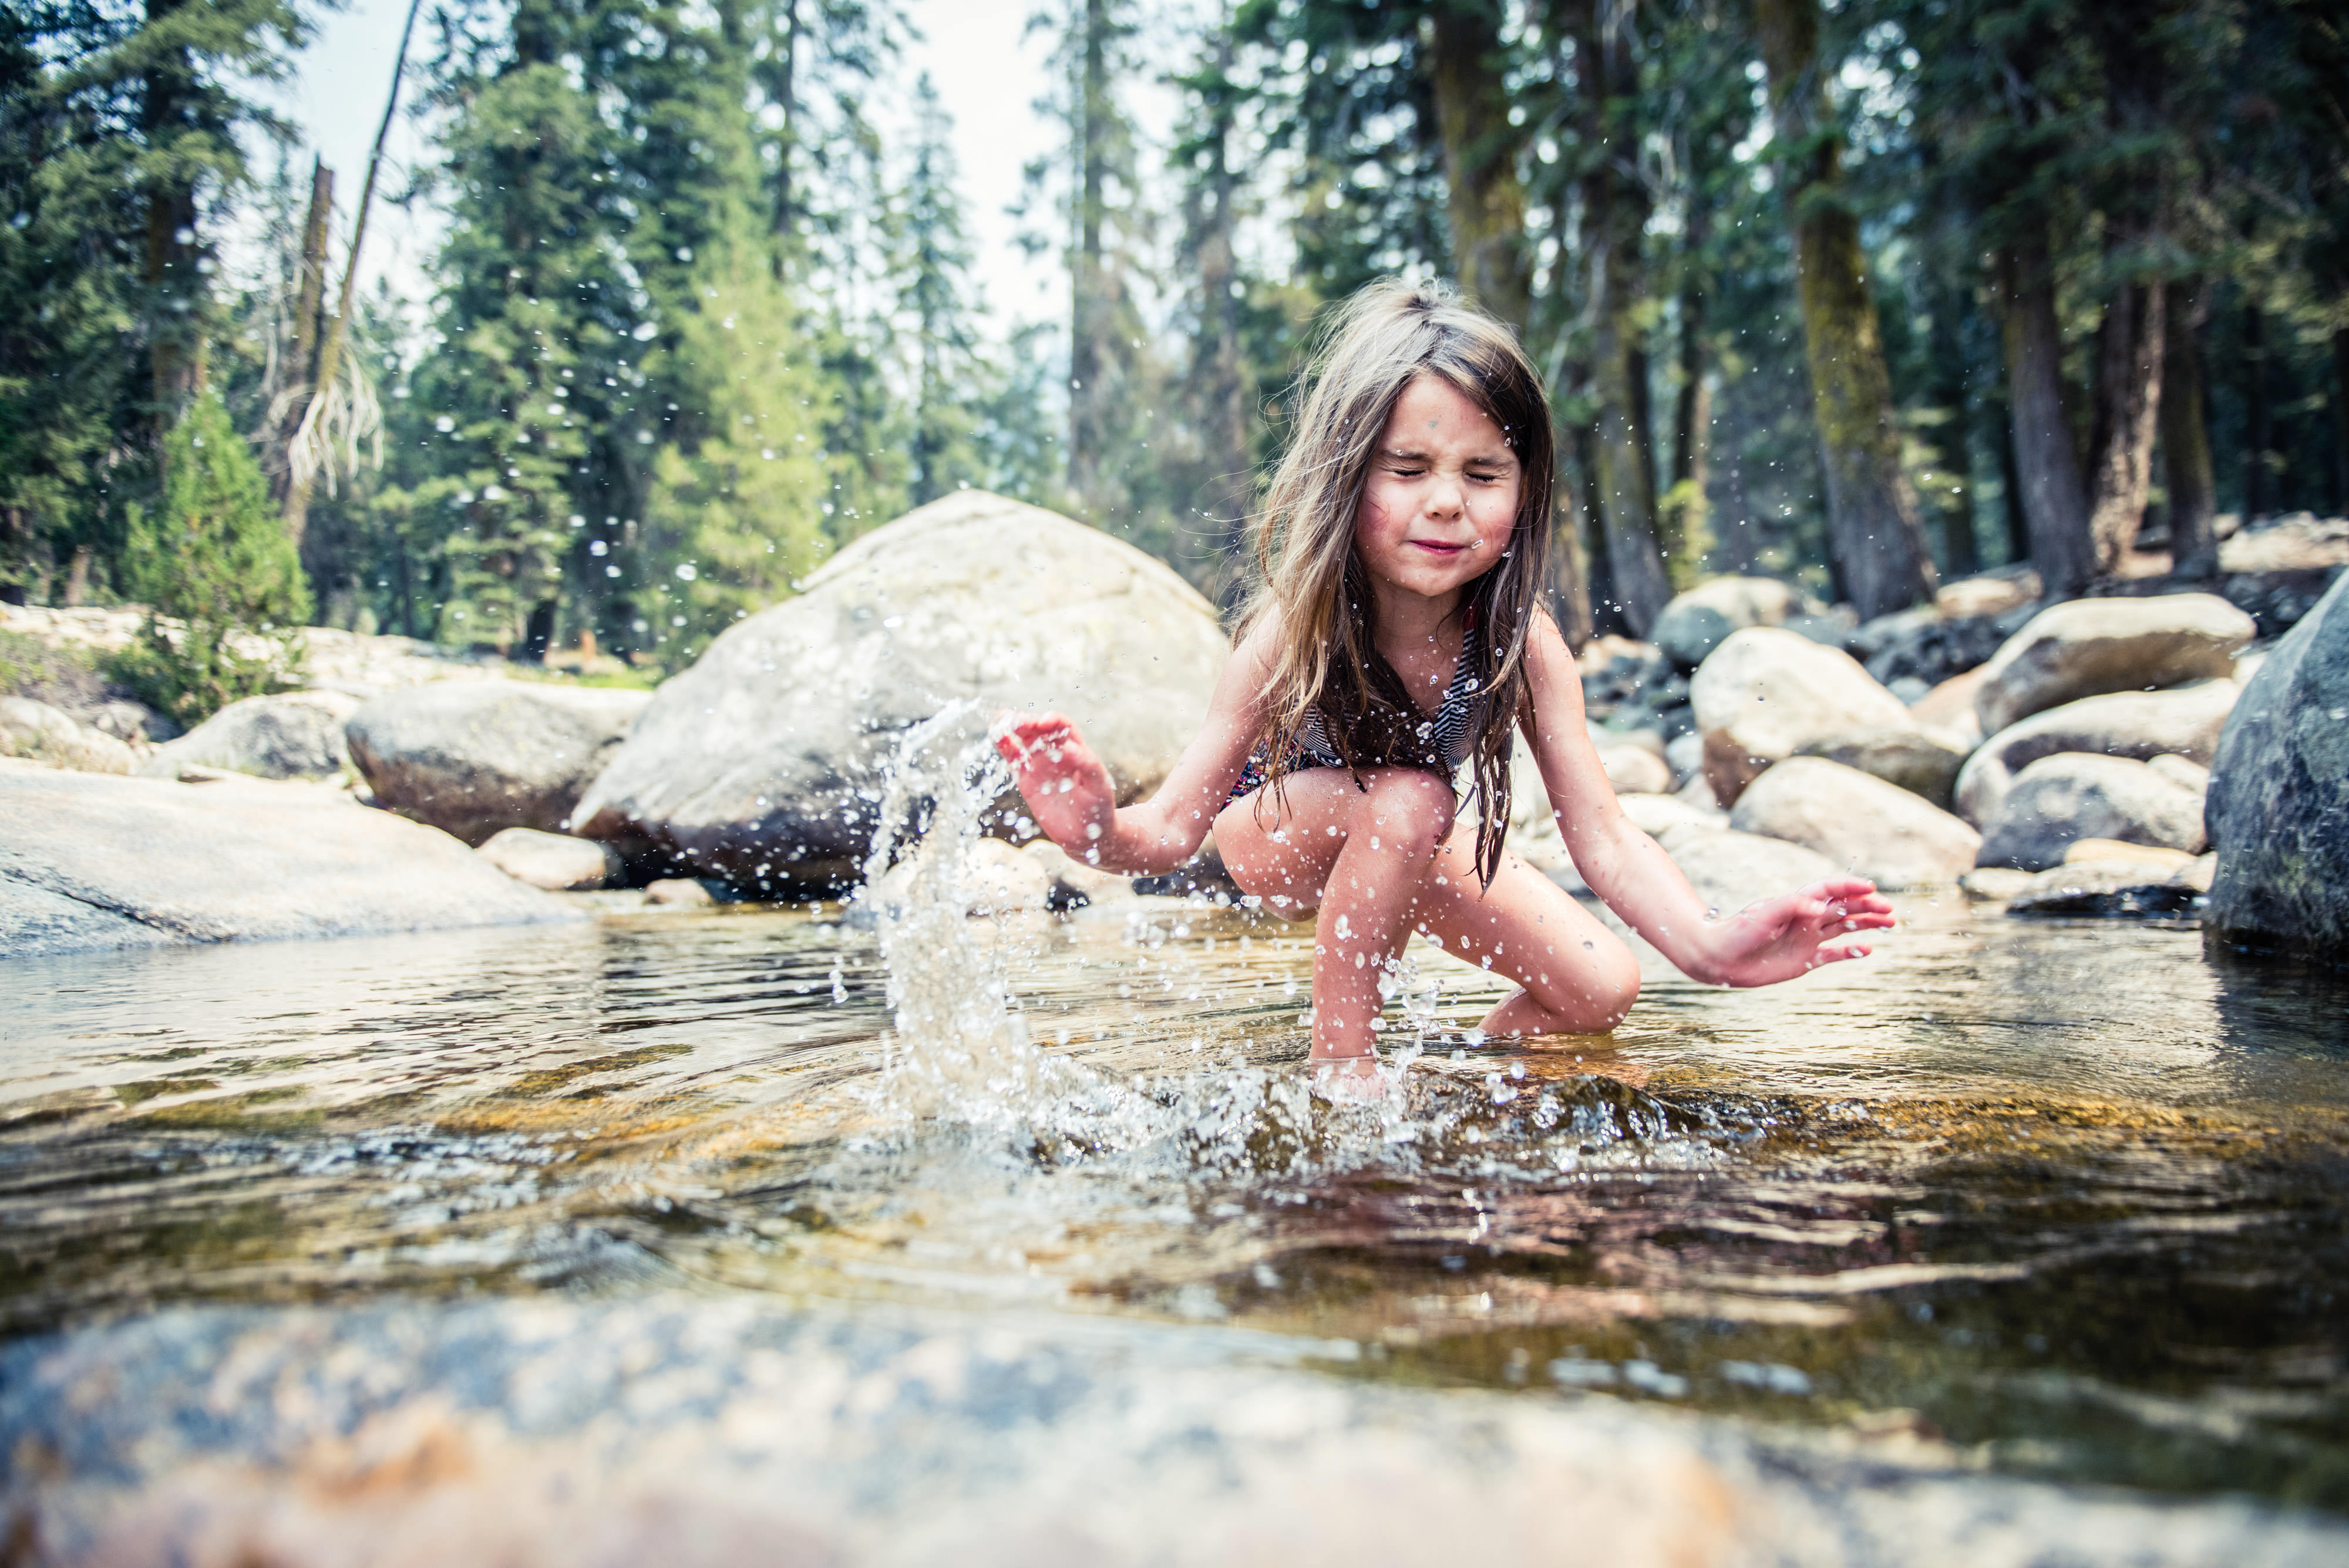 A girl splashes water in front of rocks.